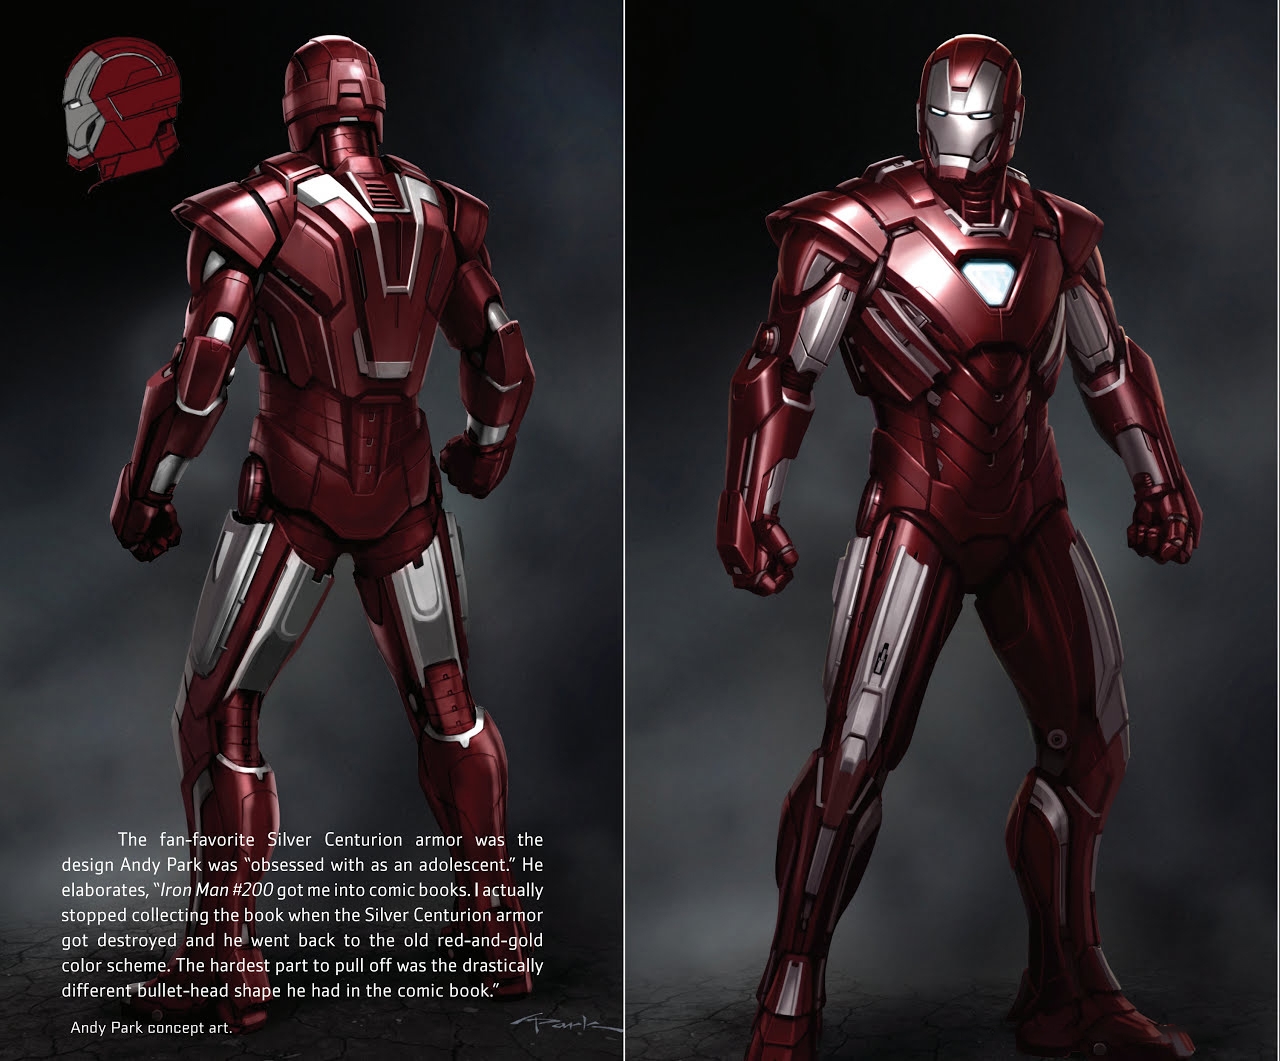 The Road to Marvel's Avengers Age of Ultron - The Art of the Marvel Cinematic Universe 66